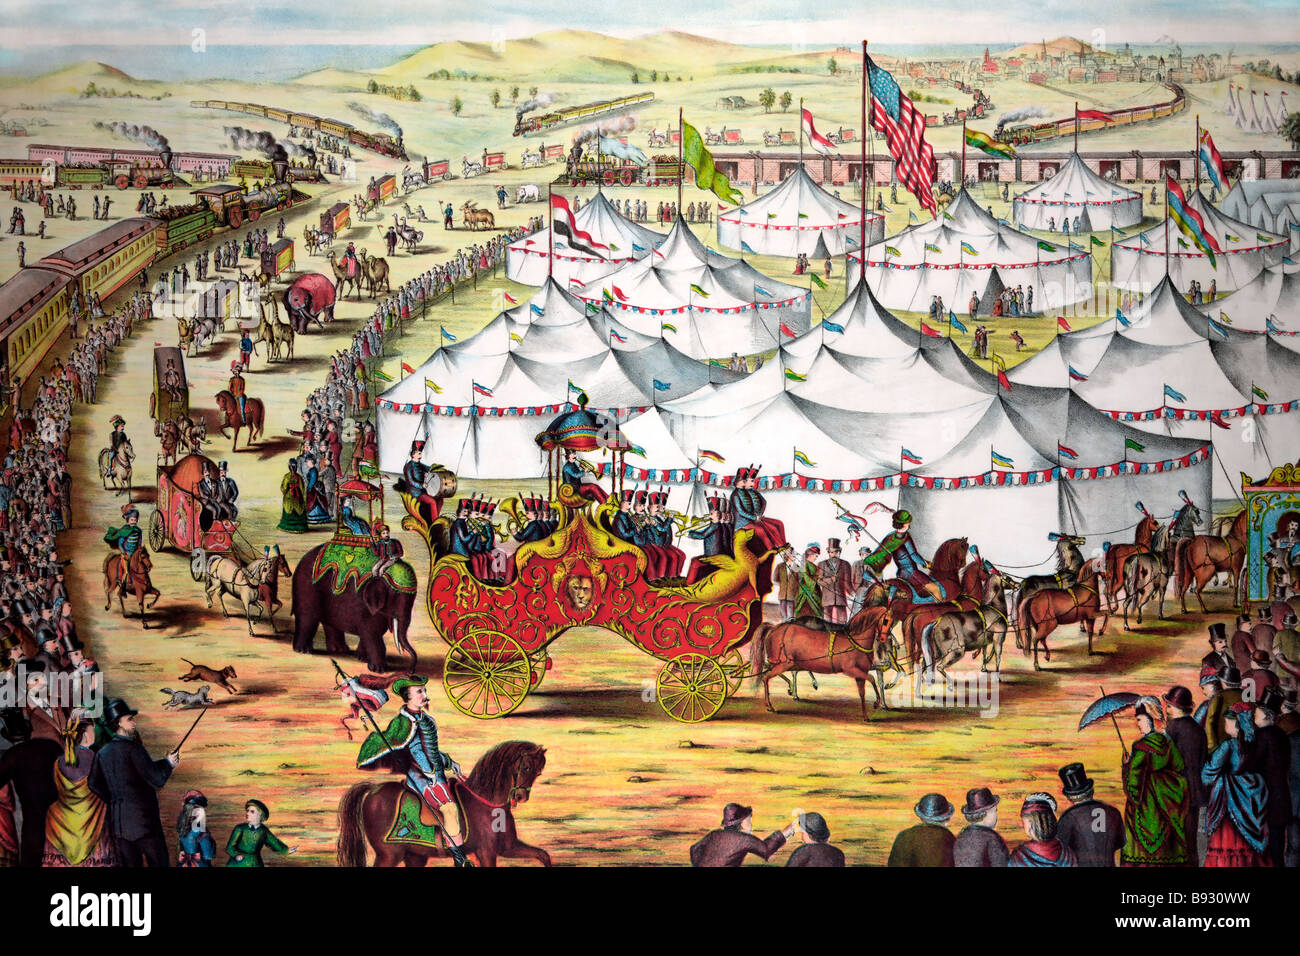 The grand lay-out - Circus parade around tents, with crowd watching alongside railroad train. Stock Photo